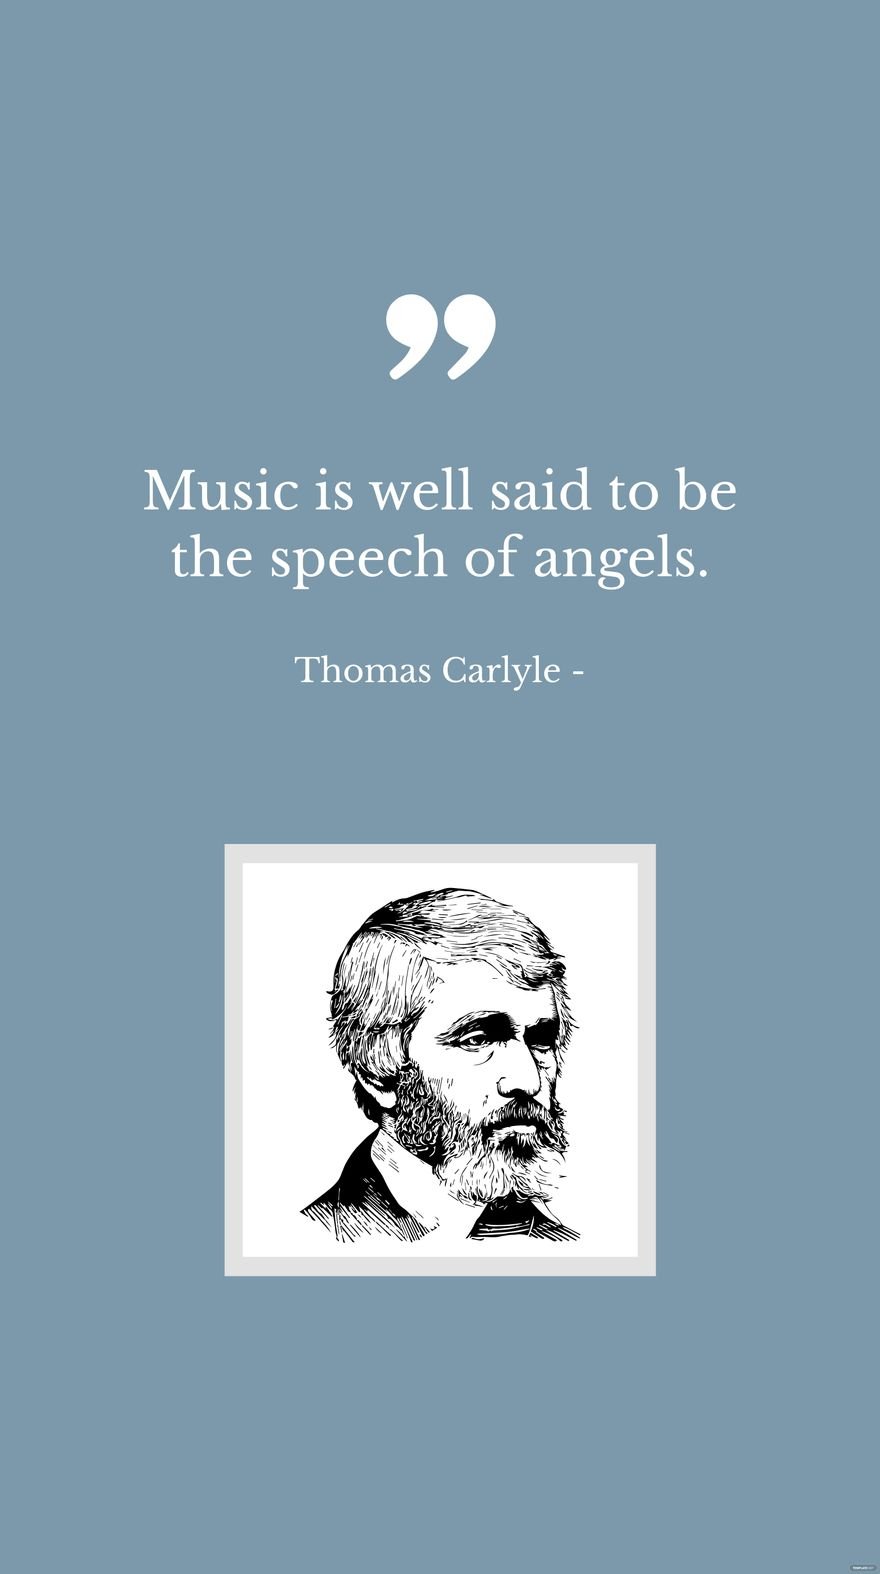 Free Thomas Carlyle - Music is well said to be the speech of angels. in JPG